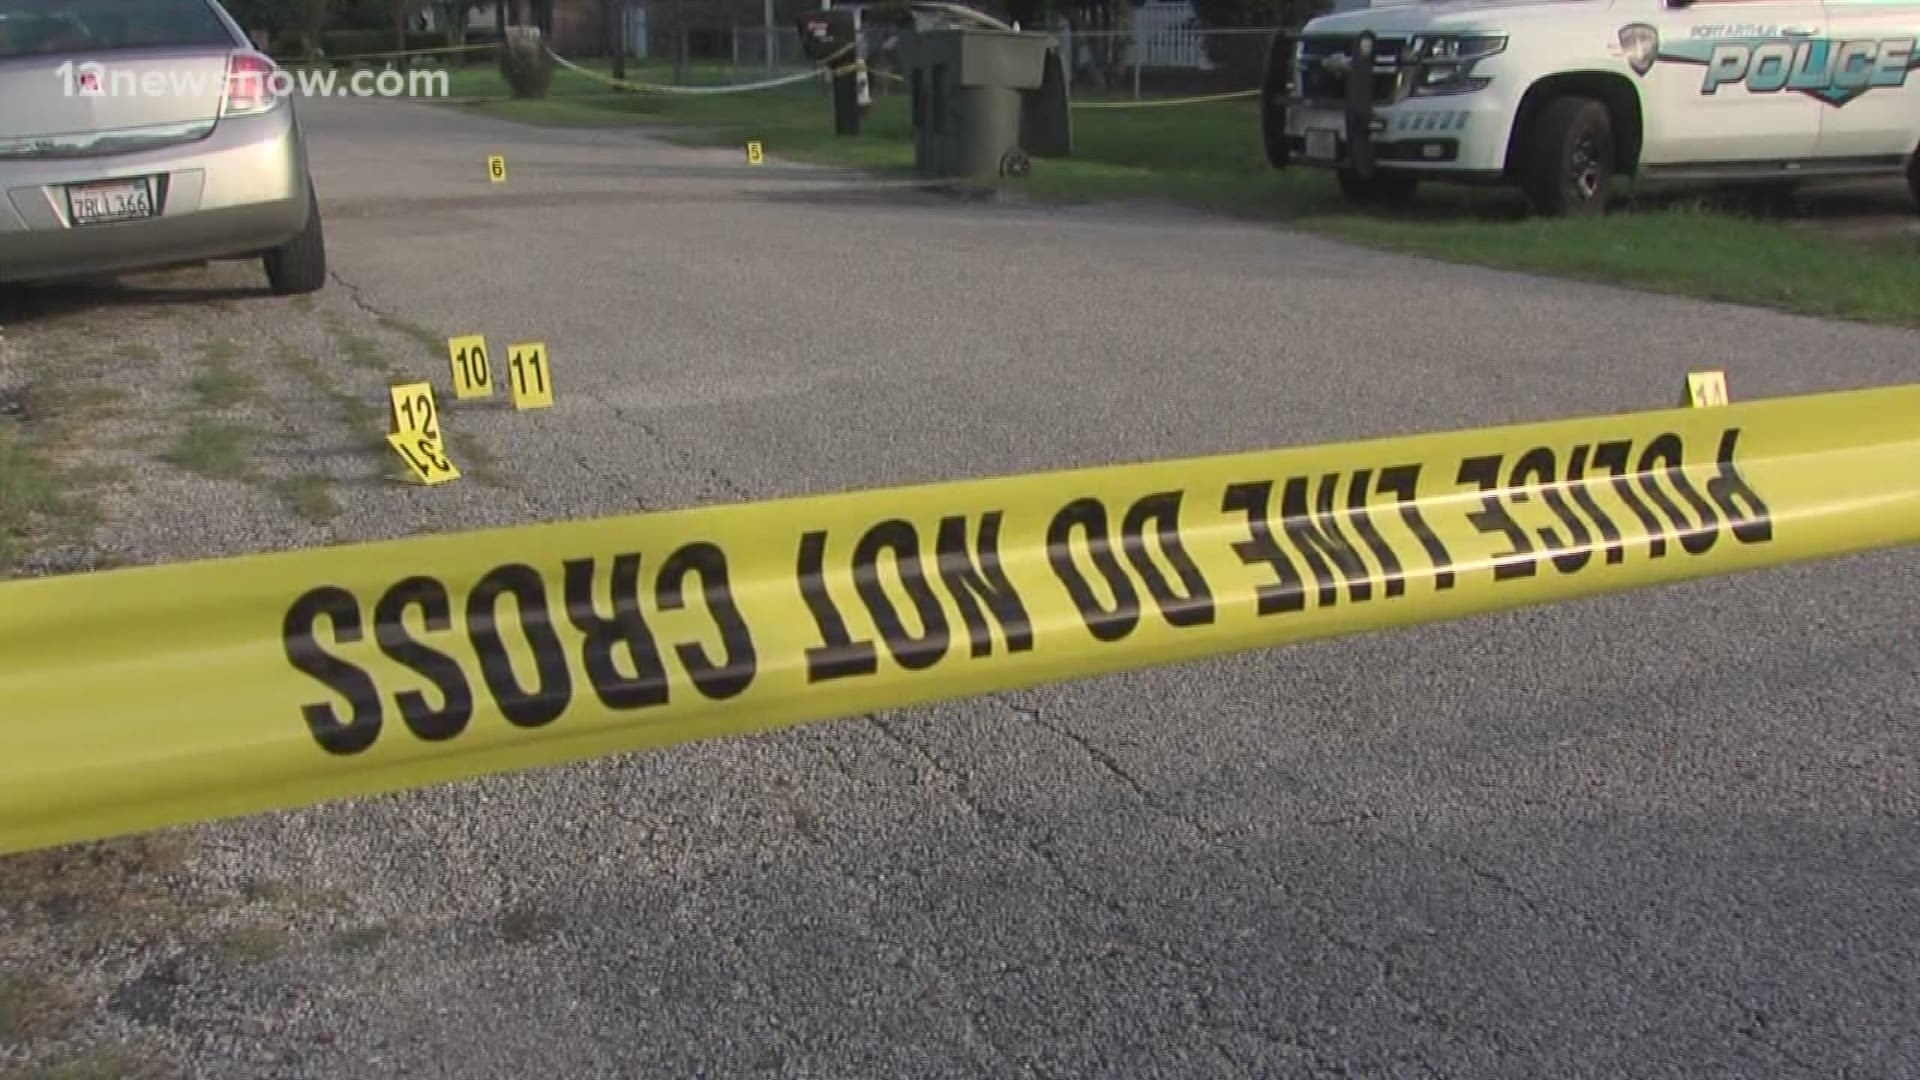 Police are looking for the suspect or suspects after a child was shot in the back.